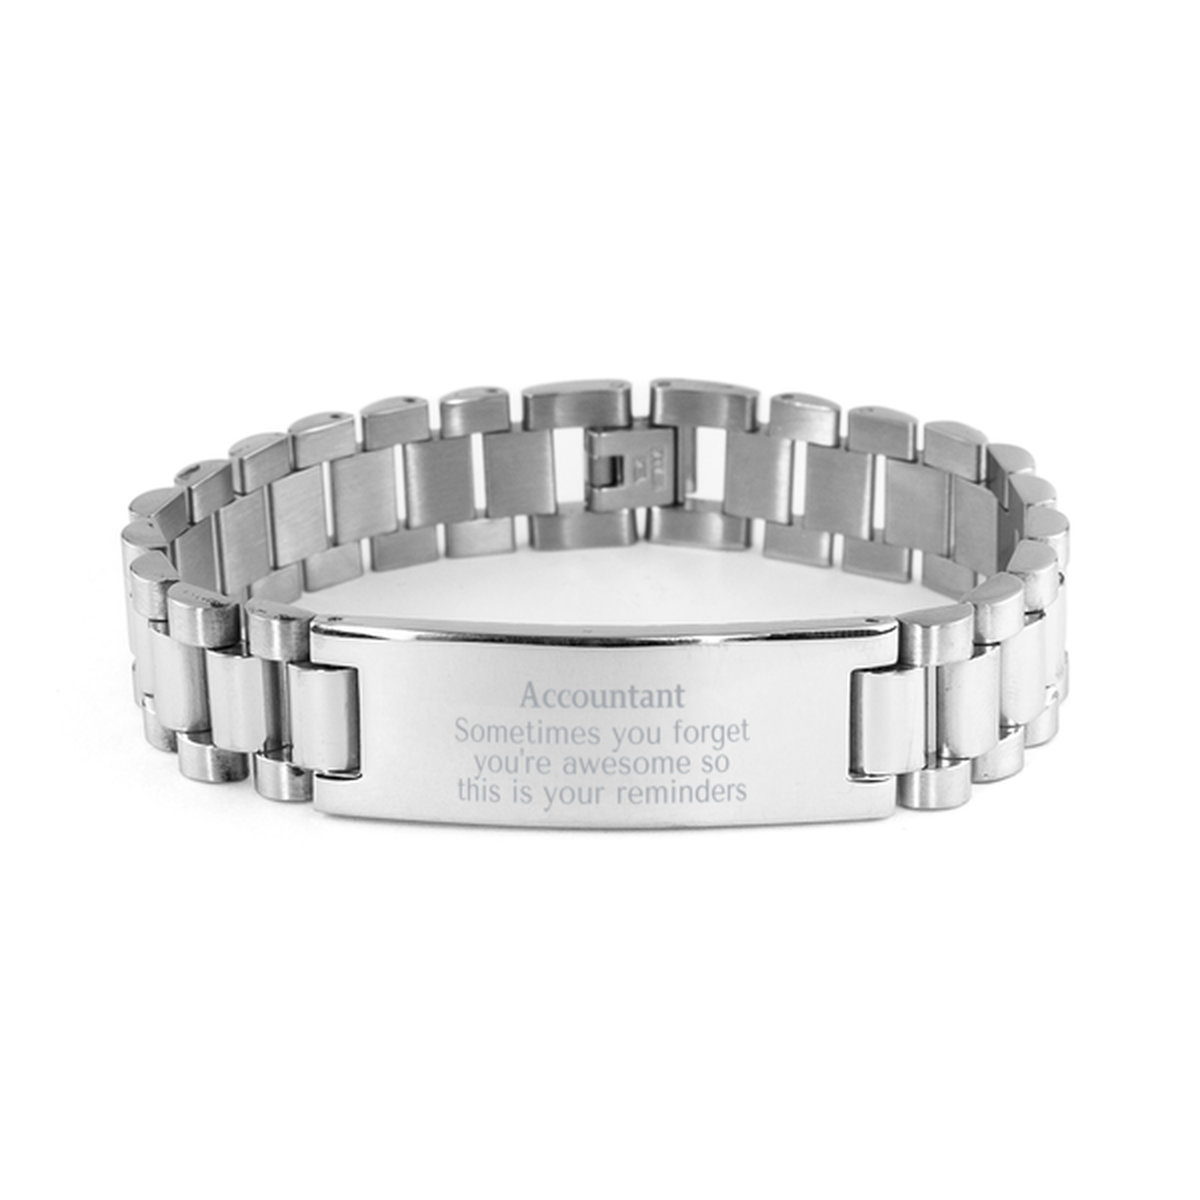 Sentimental Accountant Ladder Stainless Steel Bracelet, Accountant Sometimes you forget you're awesome so this is your reminders, Graduation Christmas Birthday Gifts for Accountant, Men, Women, Coworkers